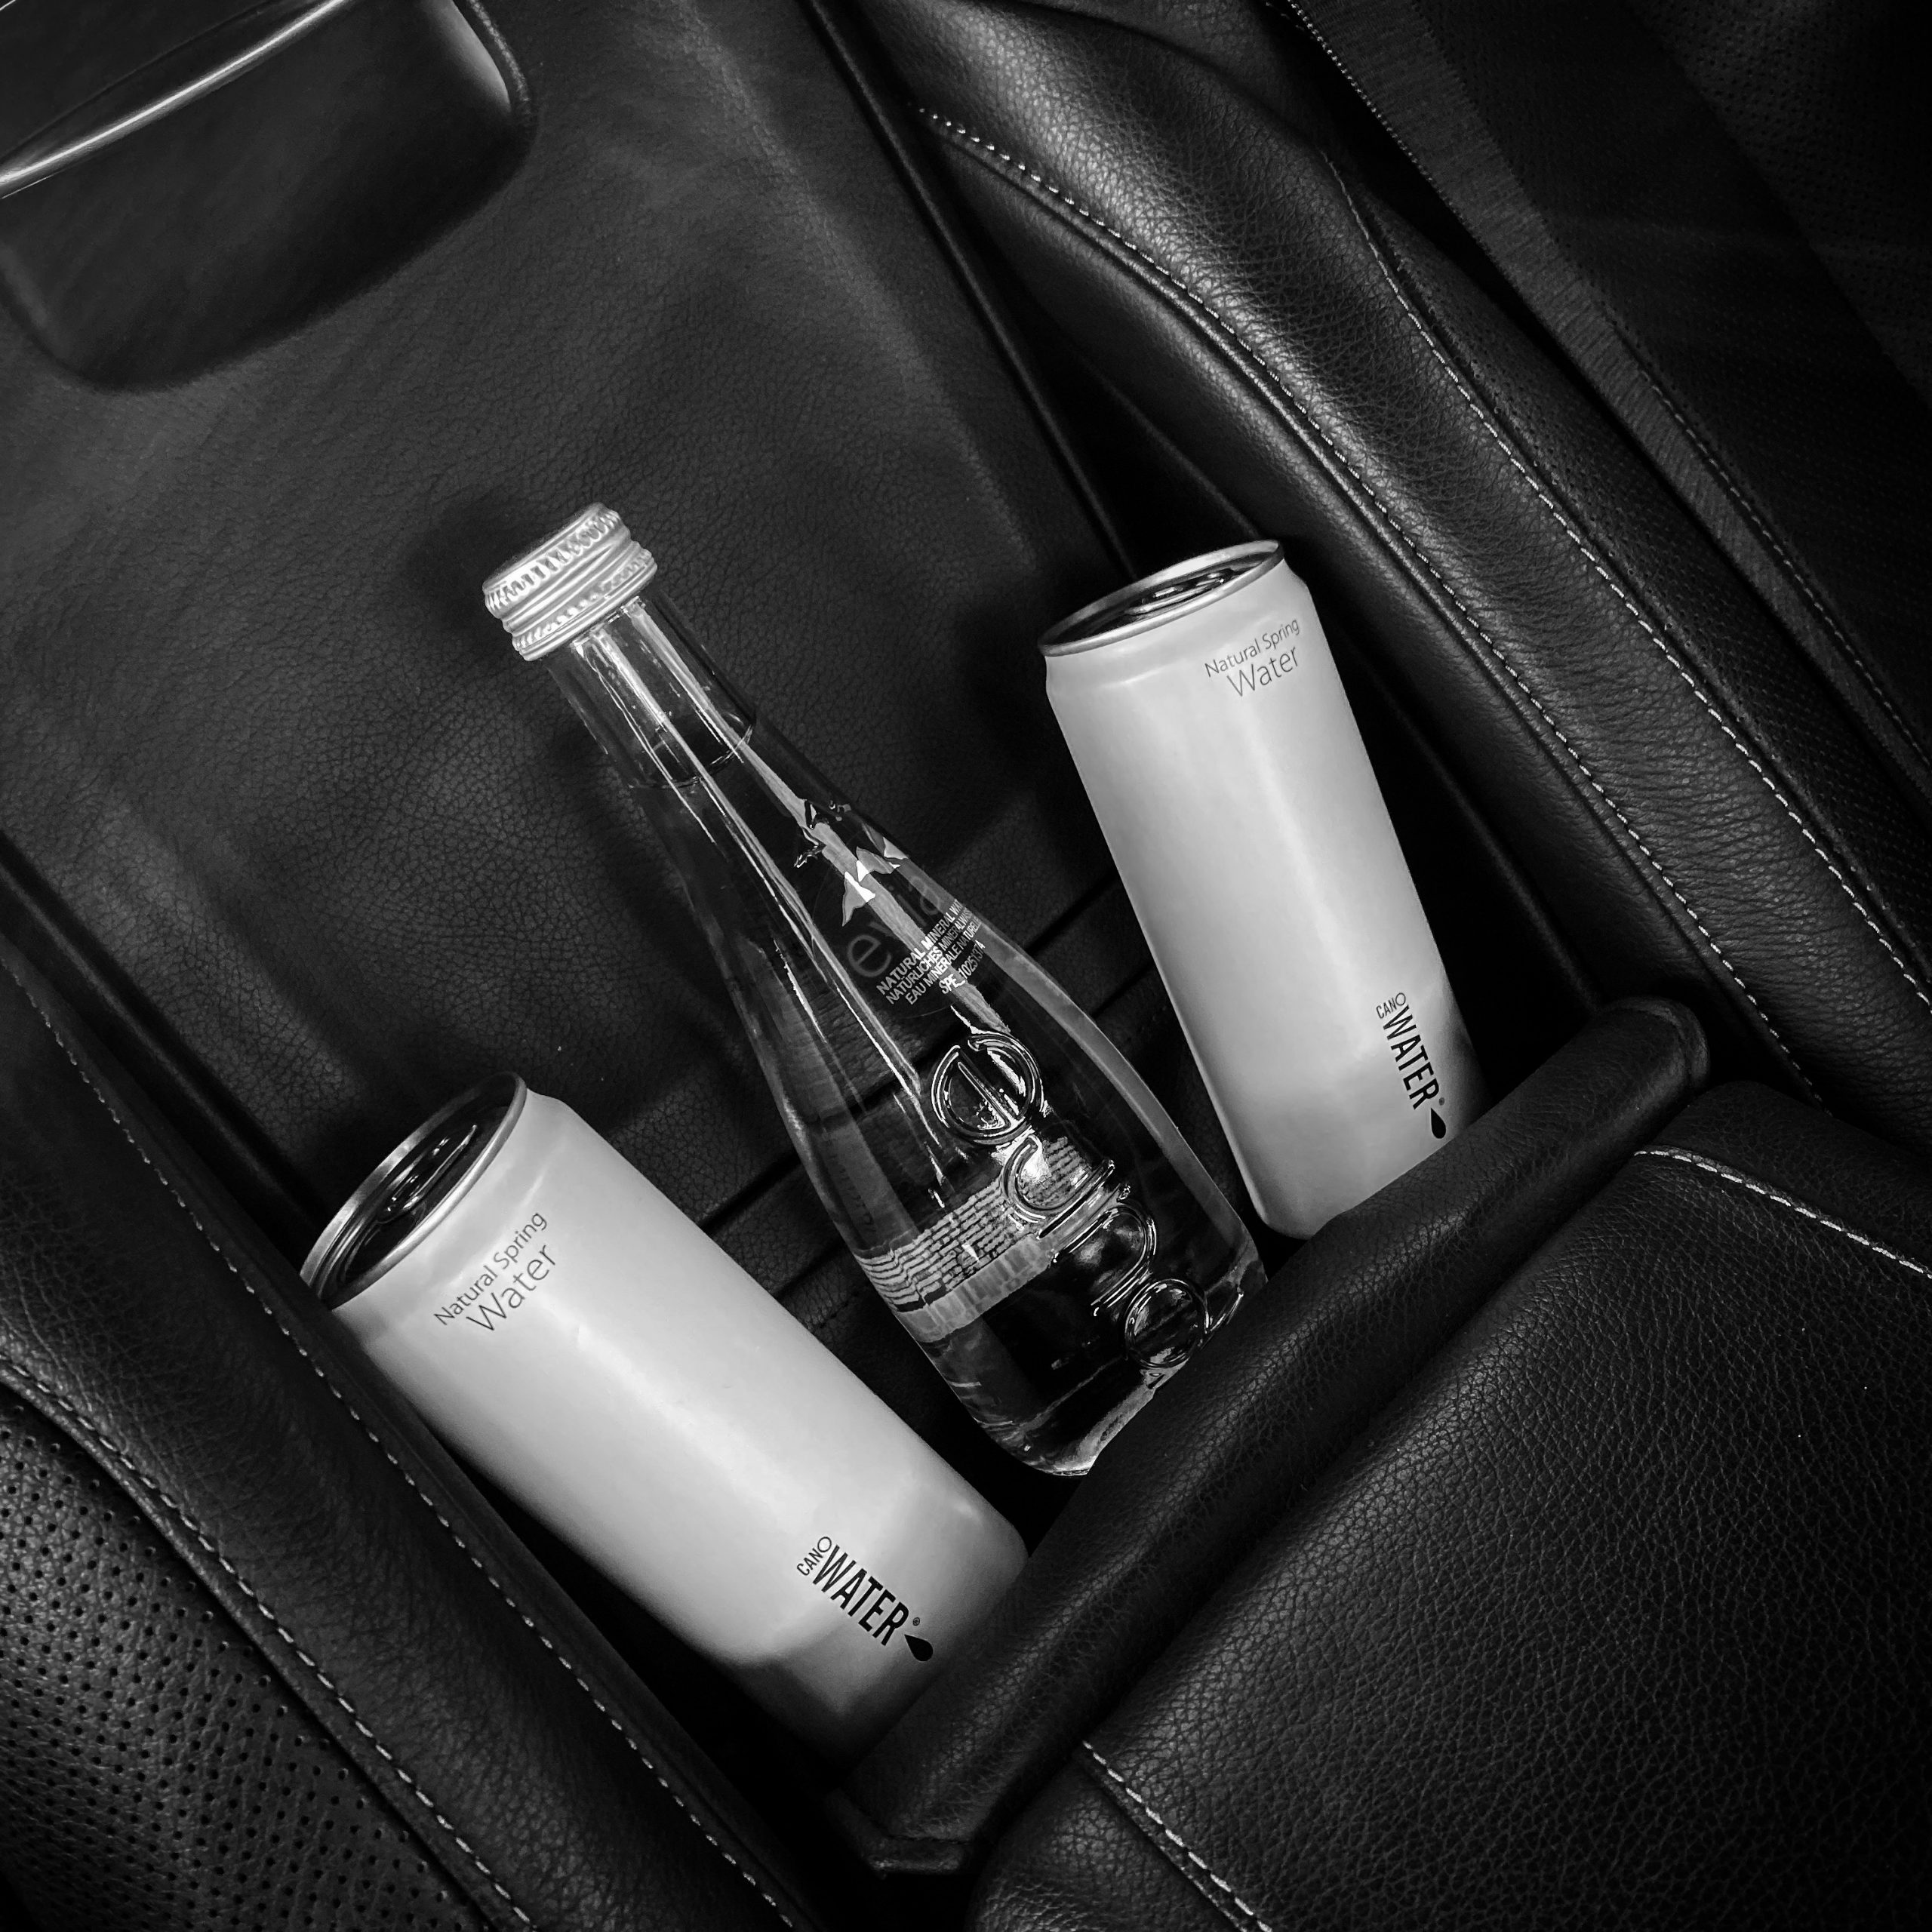 Premium Evian and Canowater for staying hydrated on chauffeured travel 